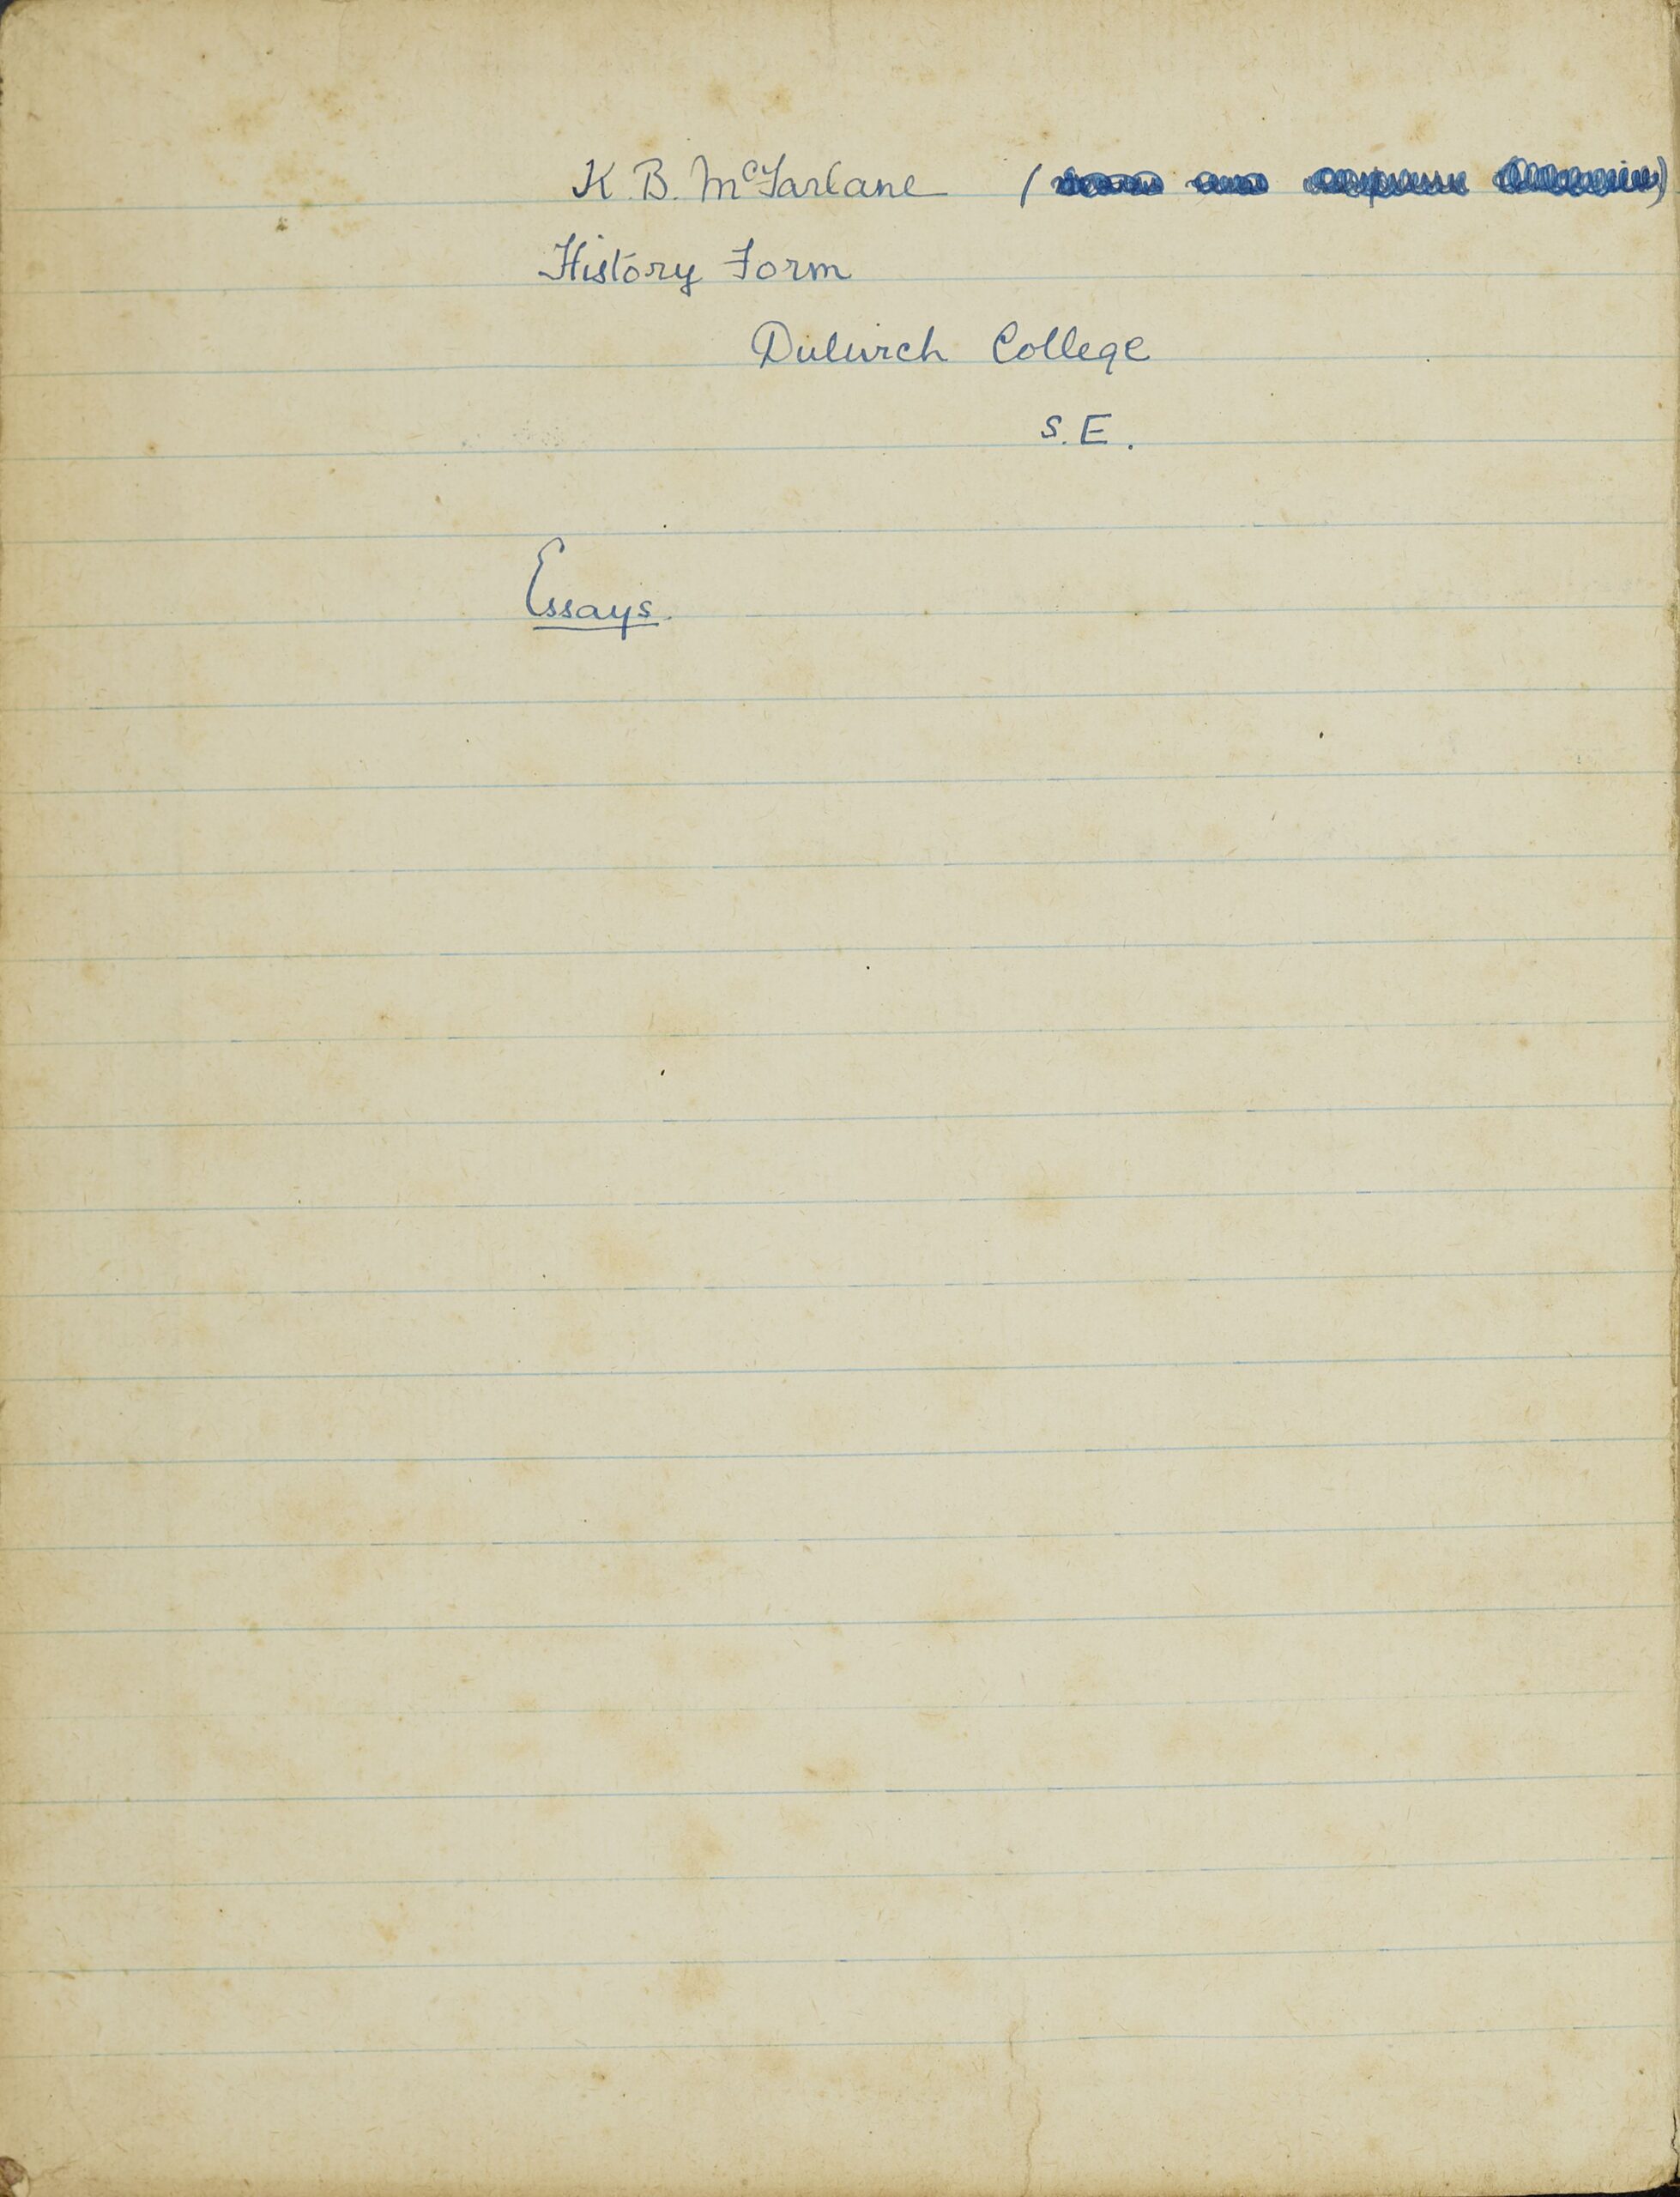 Inside cover of notebook. In it, written in blue ink "K. B. McFarlane" then four words which have been crossed out so they can't be read. Then "History form Dulwich College SE Essays."